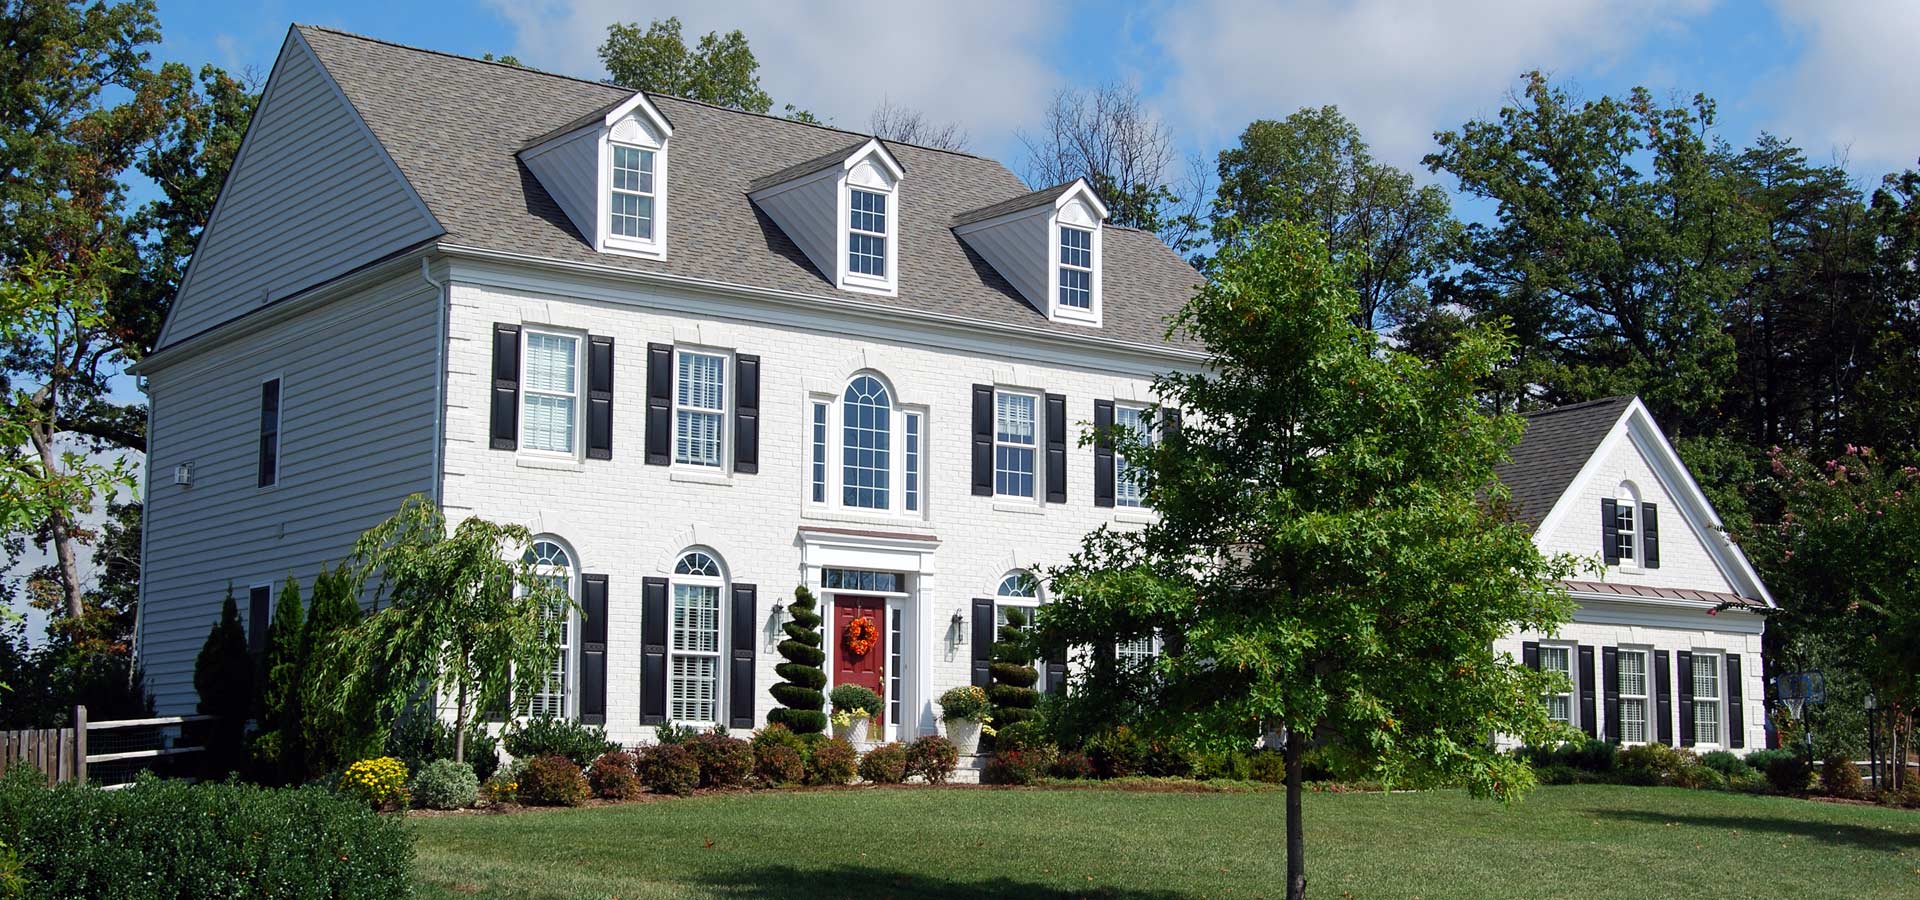 EASTERN CONNECTICUT AND WESTERN RHODE ISLAND HOME INSPECTIONS